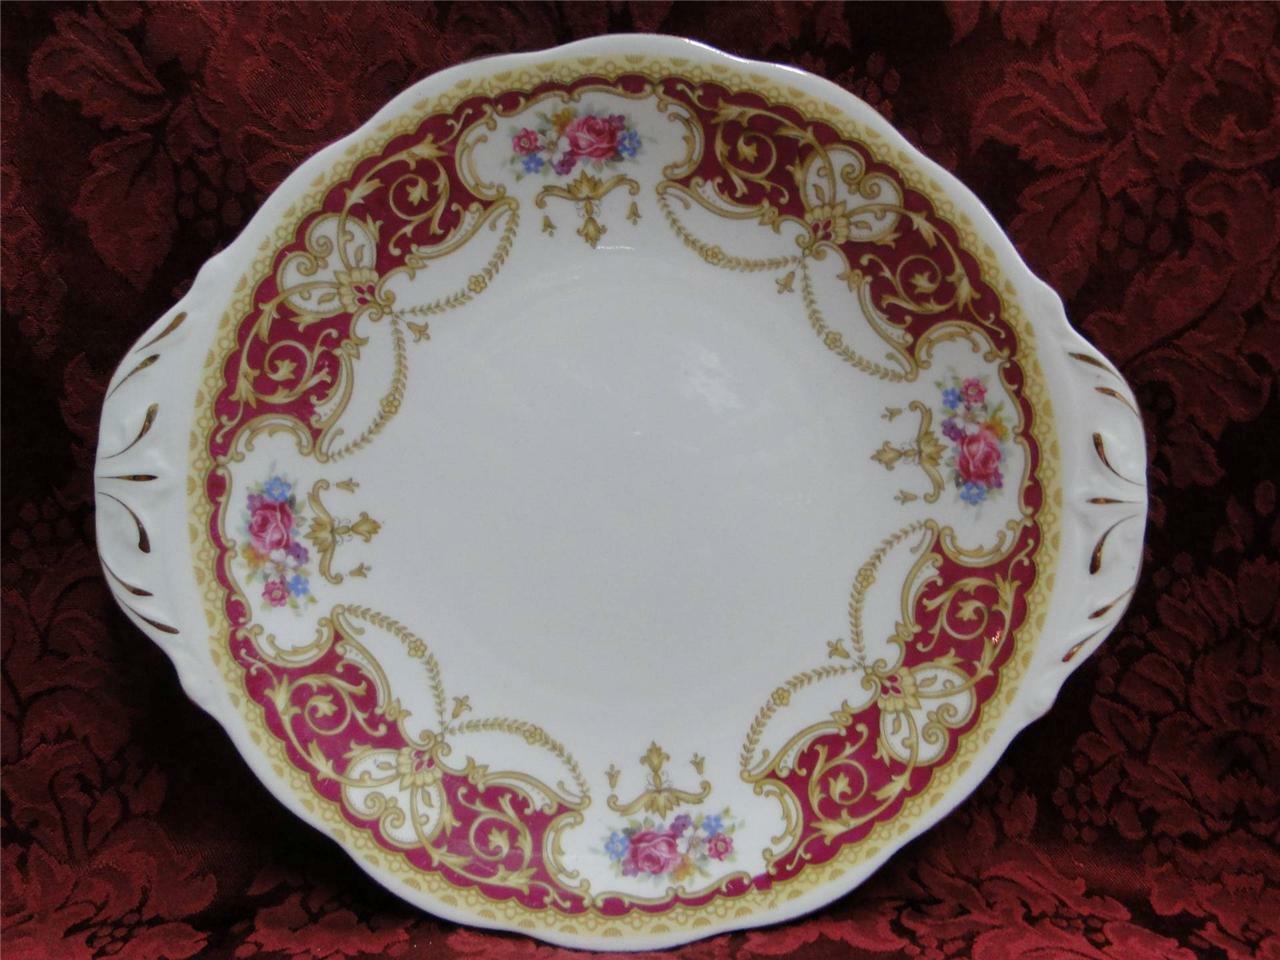 Queen Anne Regency Red, Floral Sprays Red Border: Cake Plate w/ Handles 10 3/8"